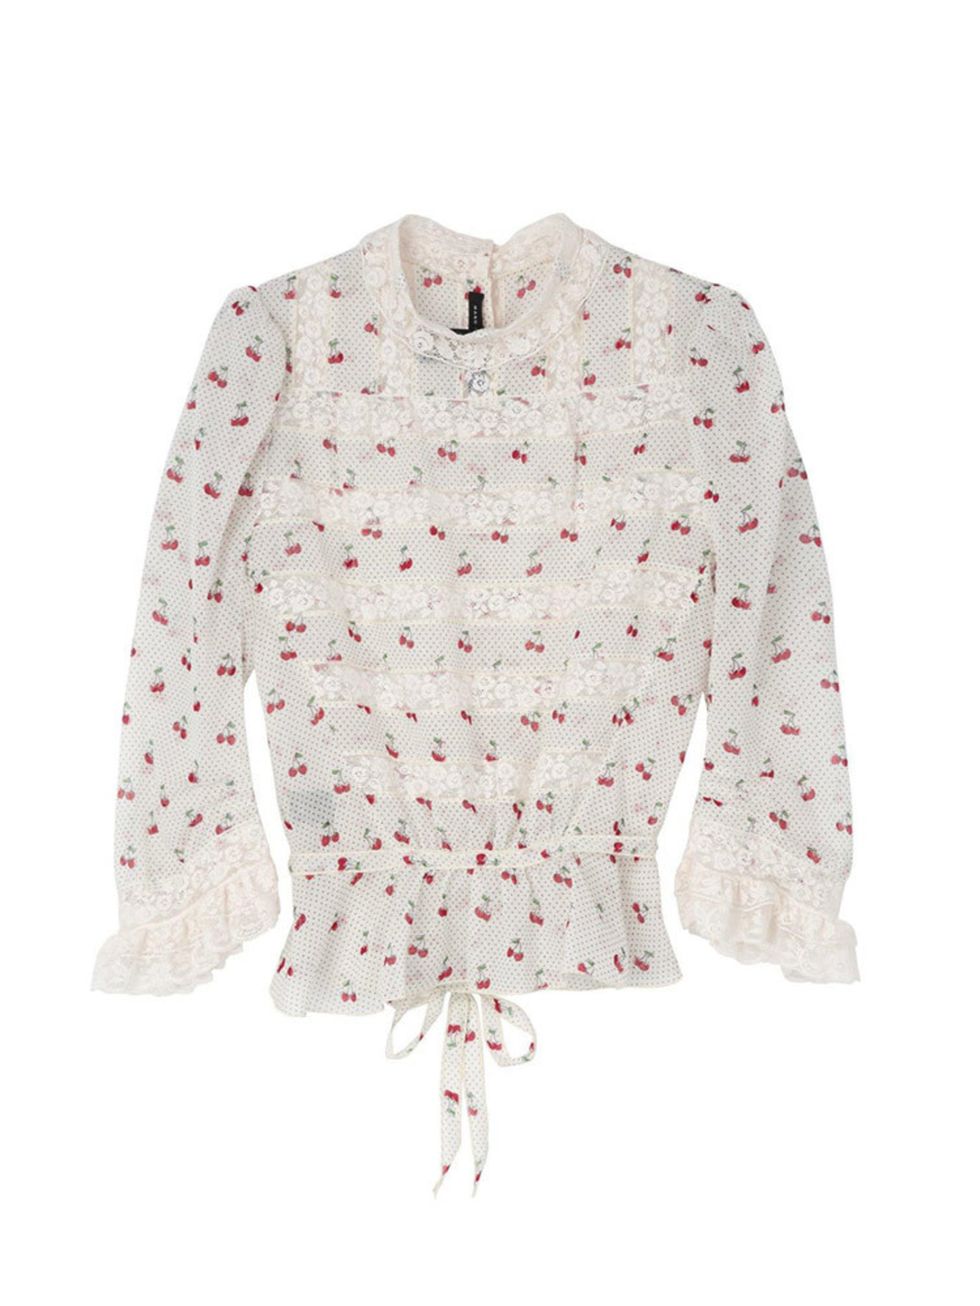 <p><a href="http://www.veryexclusive.co.uk/marc-by-marc-jacobs-cherry-pin-dot-voile-victoriana-blouse-white/1600039895.prd" target="_blank">Marc by Marc Jacobs</a> blouse, £345</p>